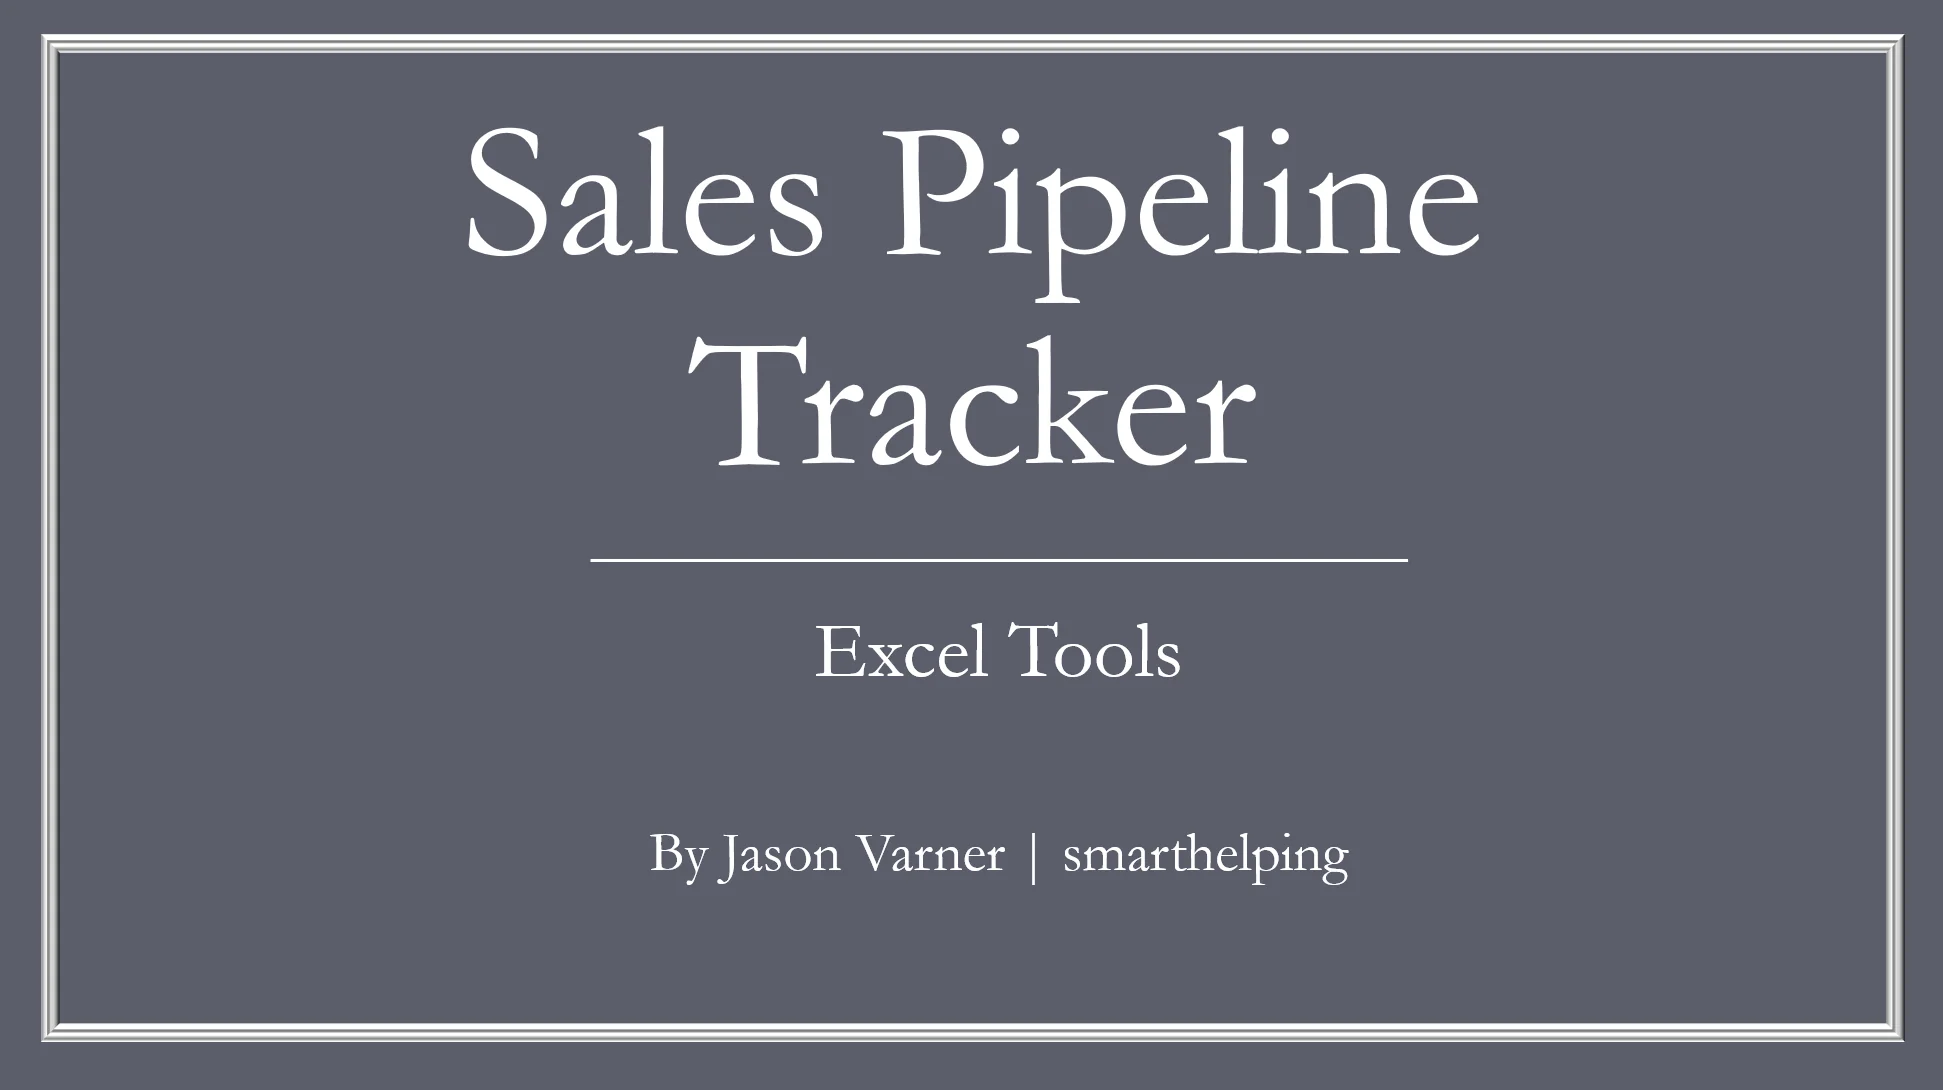 Sales Pipeline Tracker - Funnel and Gauge Visualizations